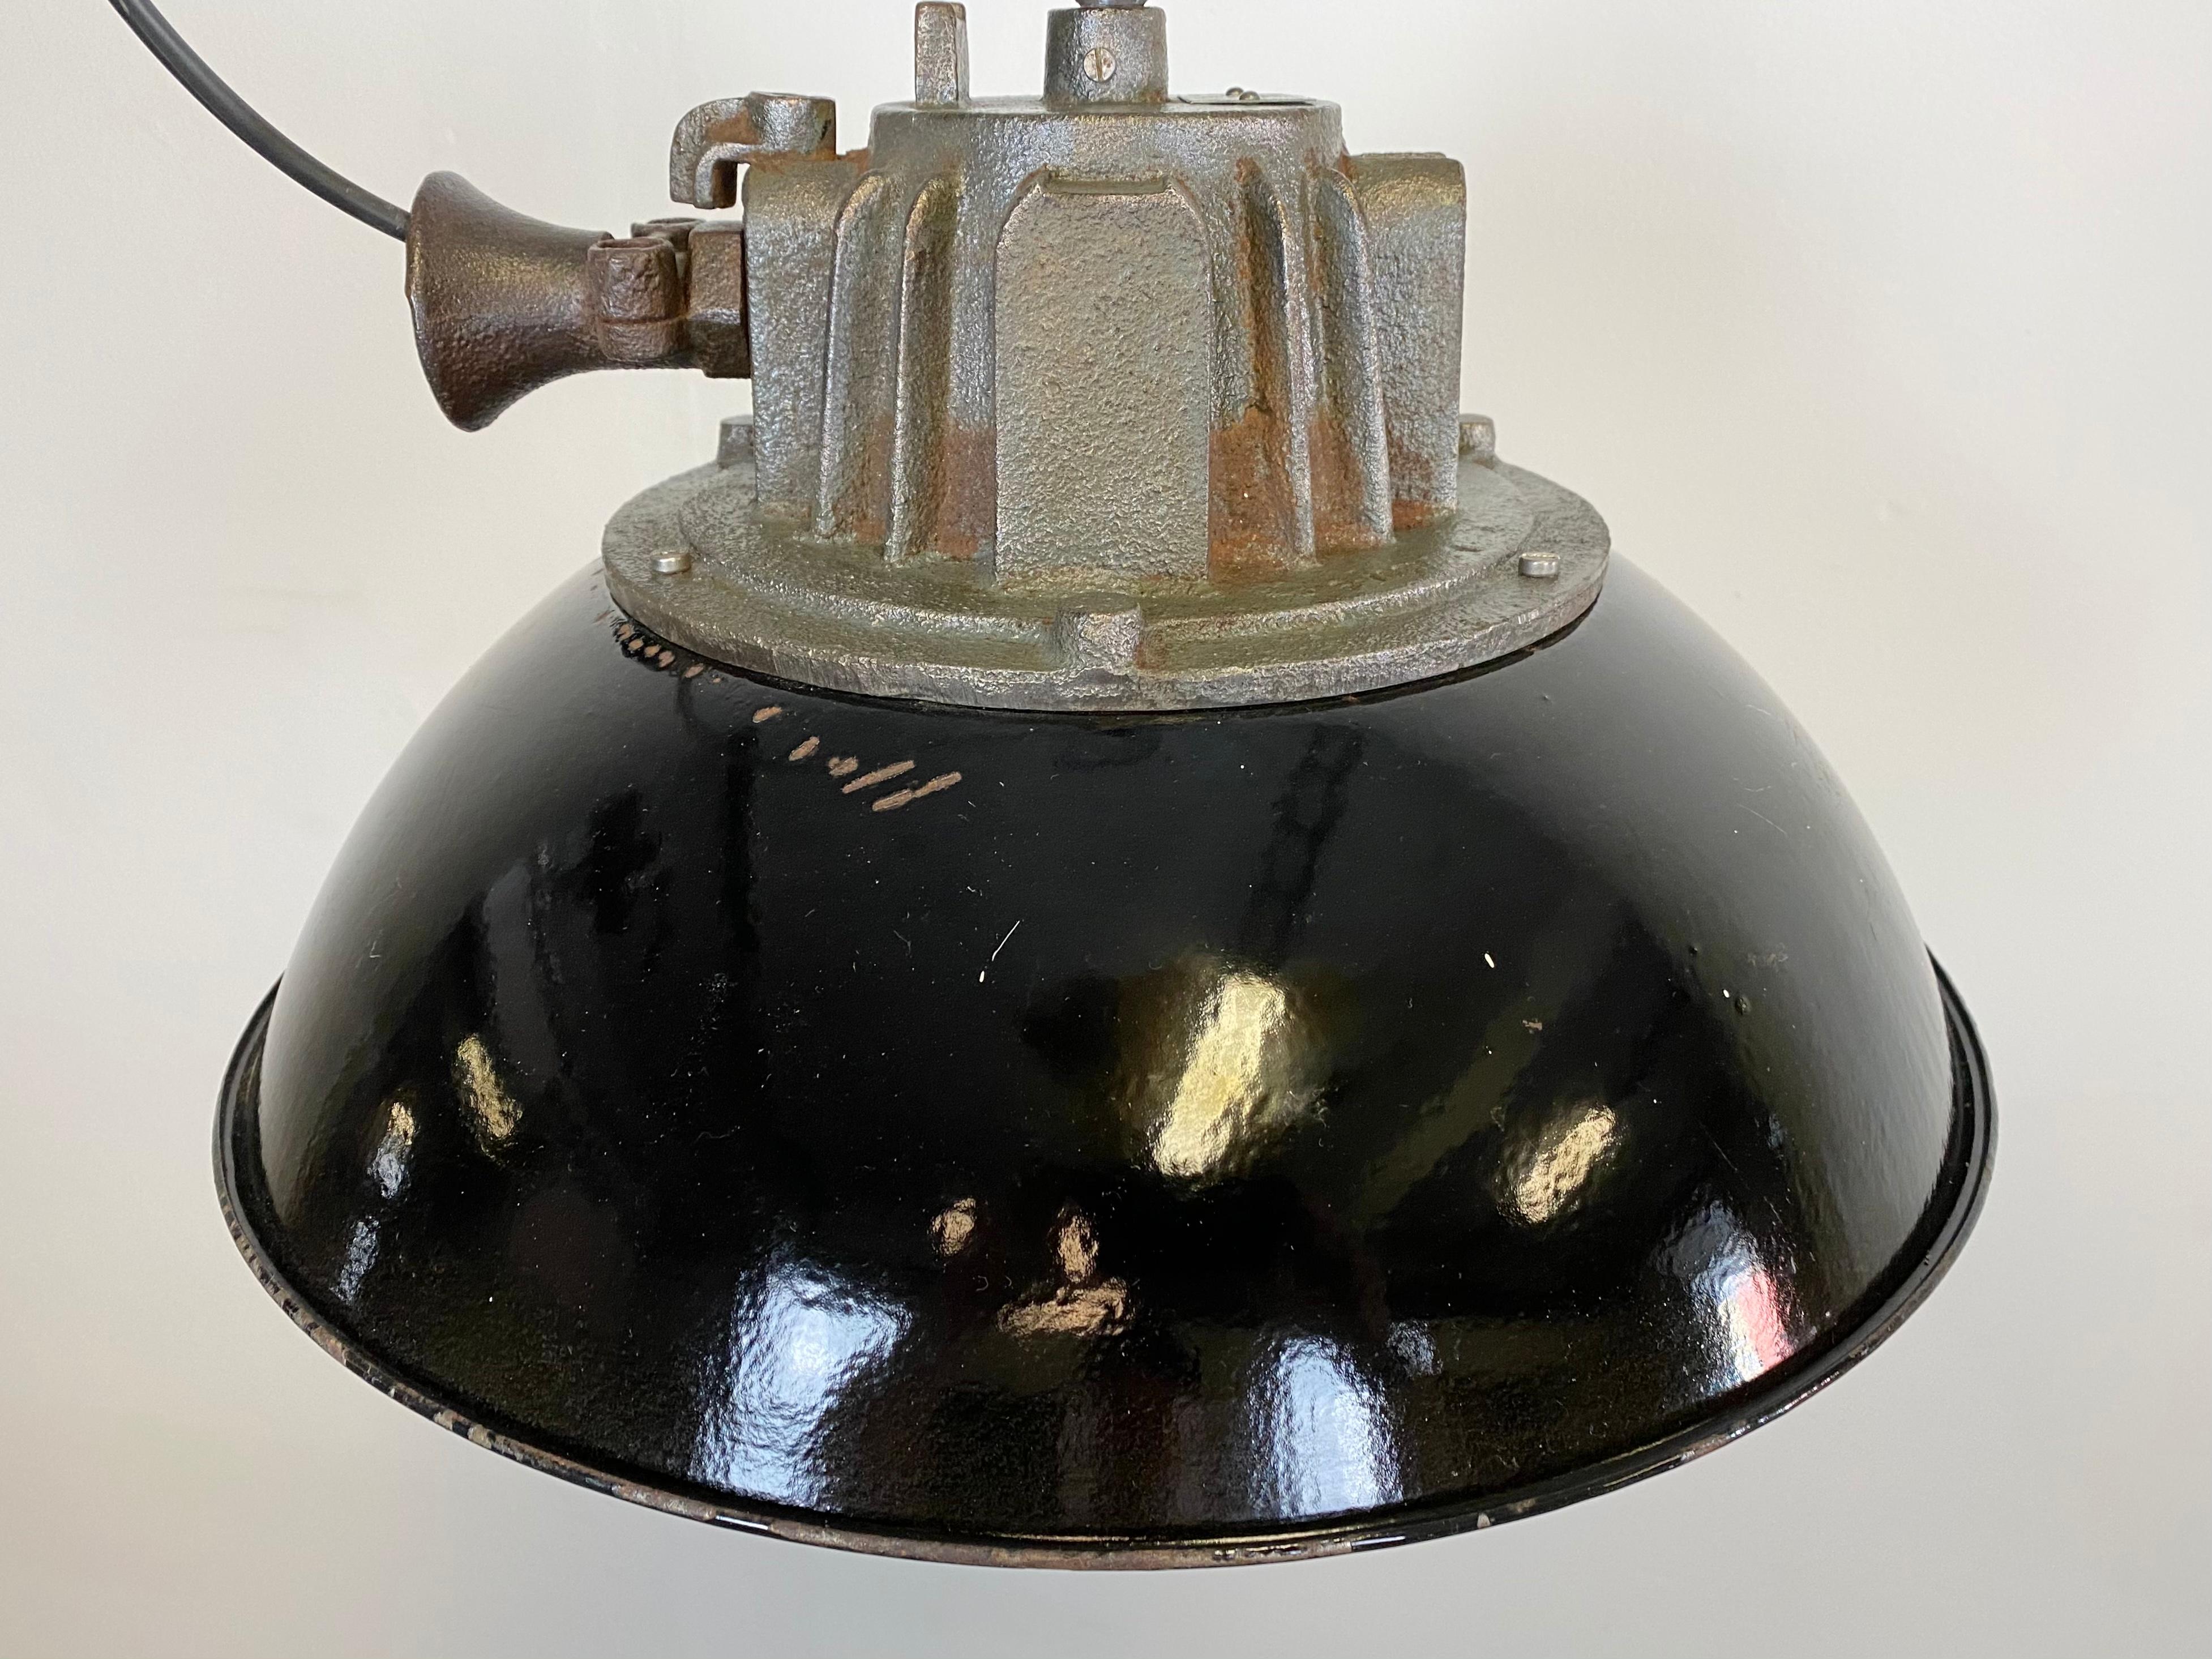 Black Enamel and Cast Iron Industrial Cage Pendant Light, 1950s For Sale 3